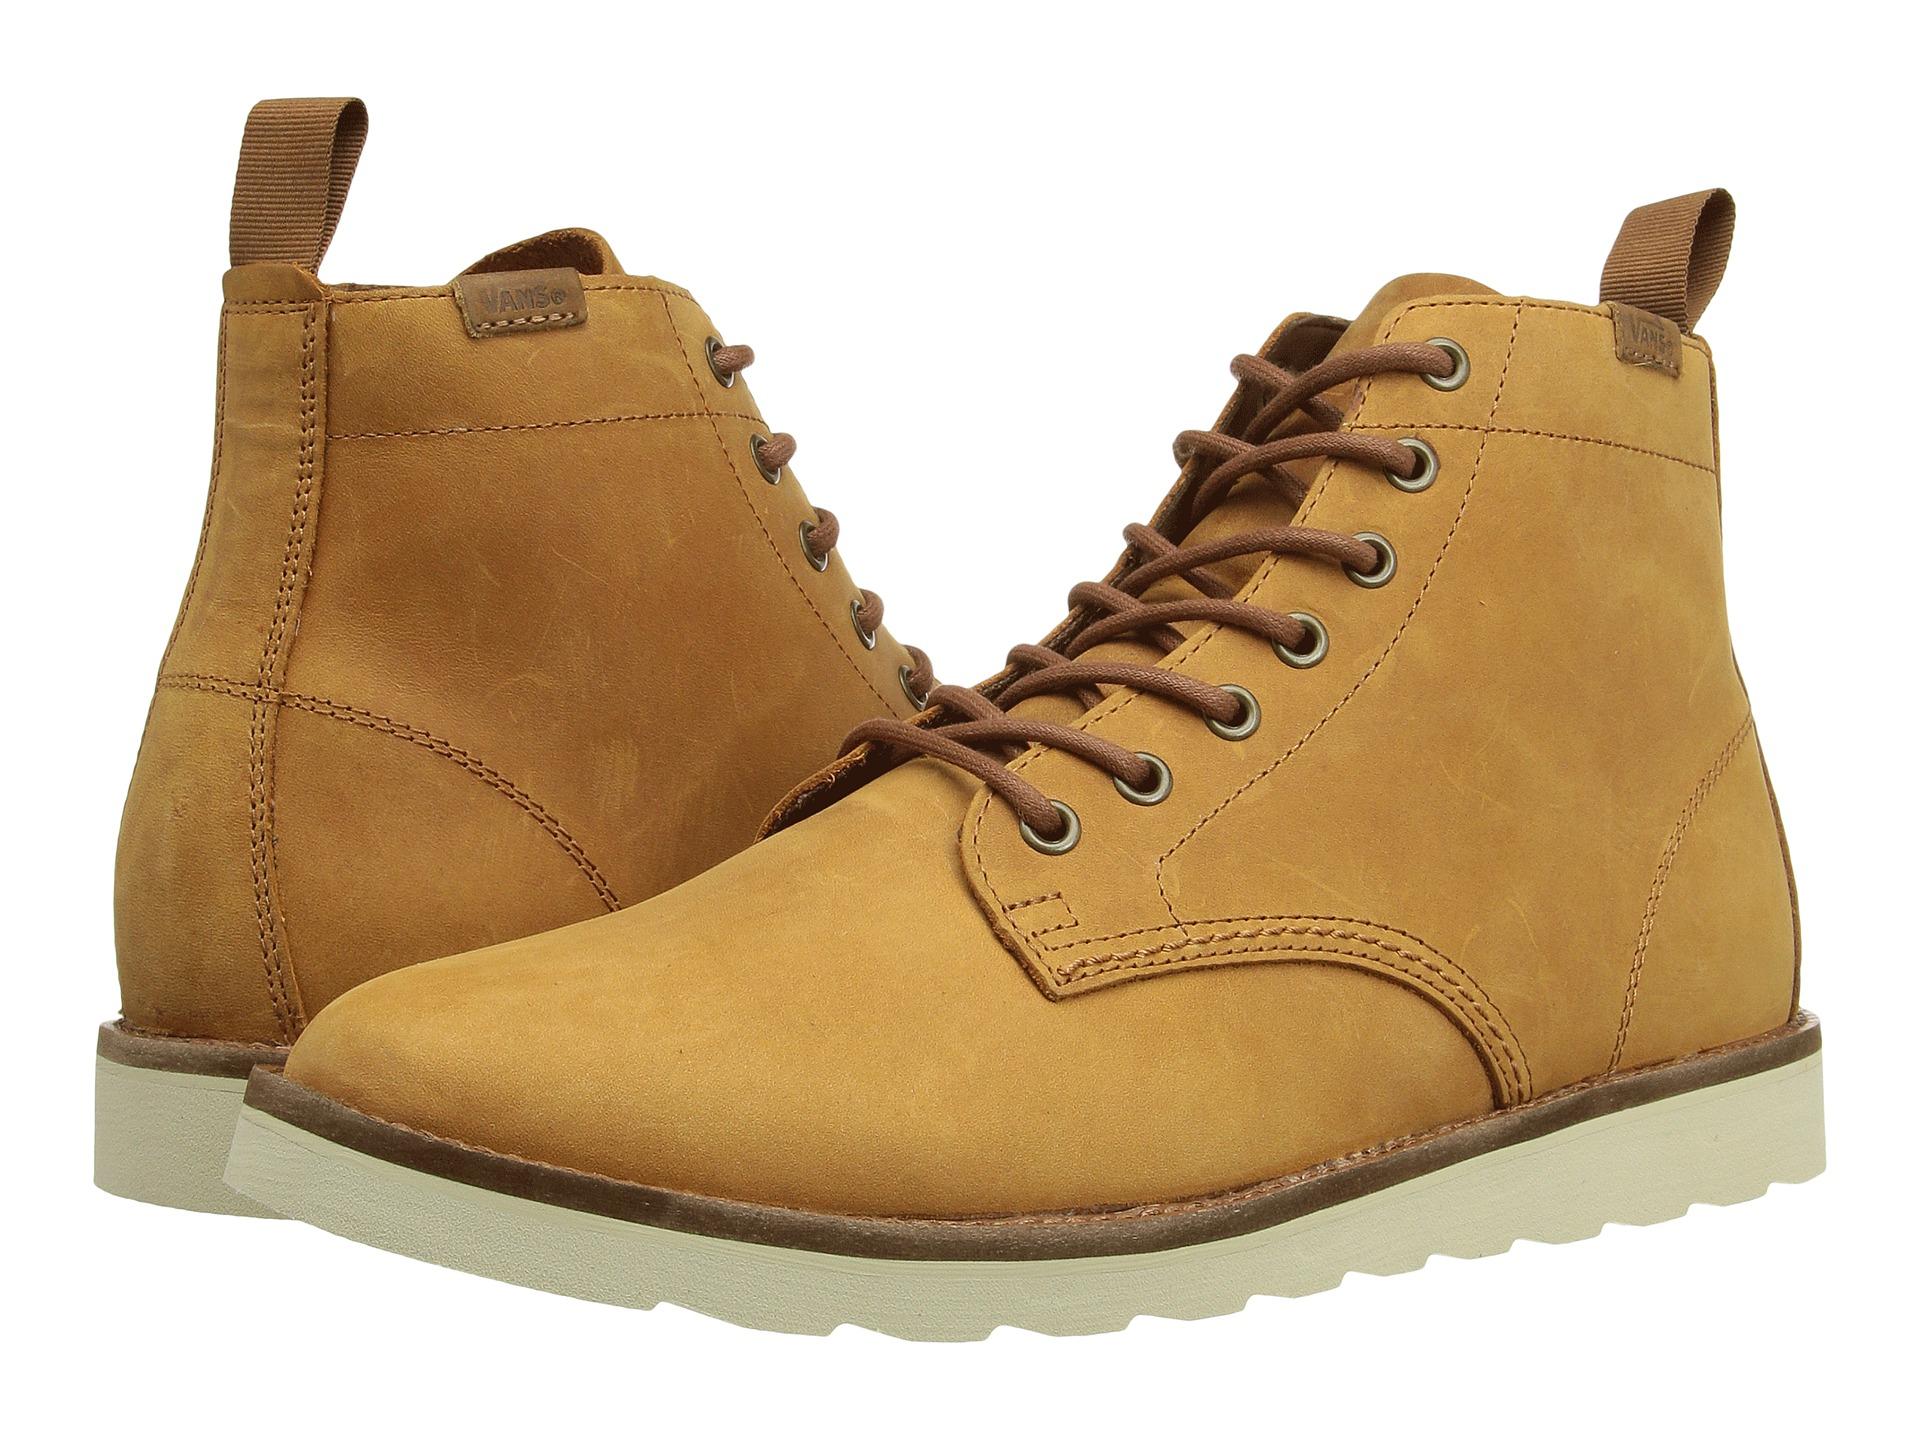 Vans Leather Sahara Boot in (Leather) Light Brown (Brown) for Men - Lyst